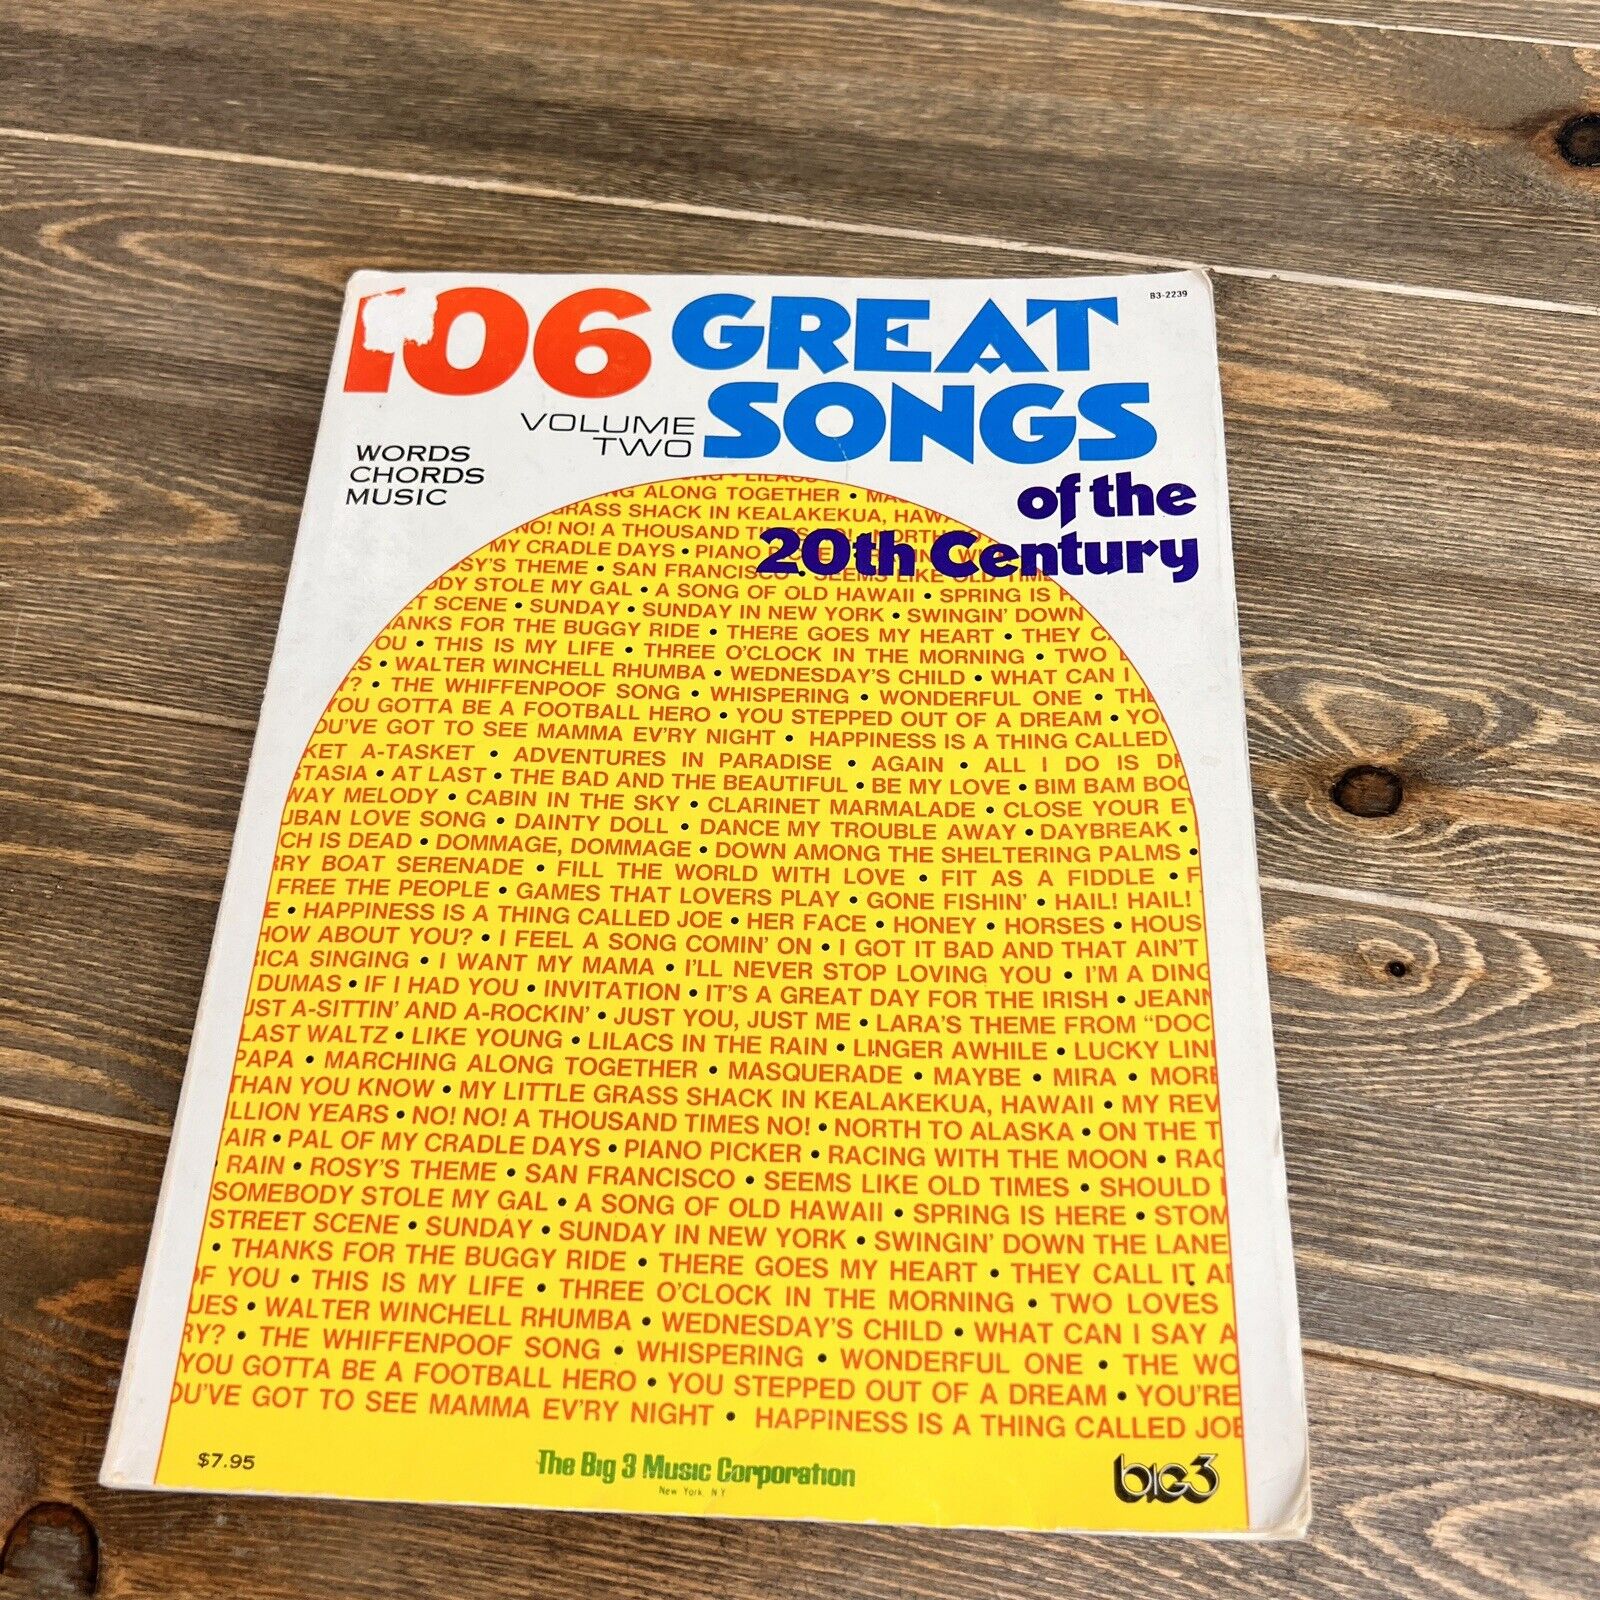 106 Great Songs of the 20th Century Volume Two